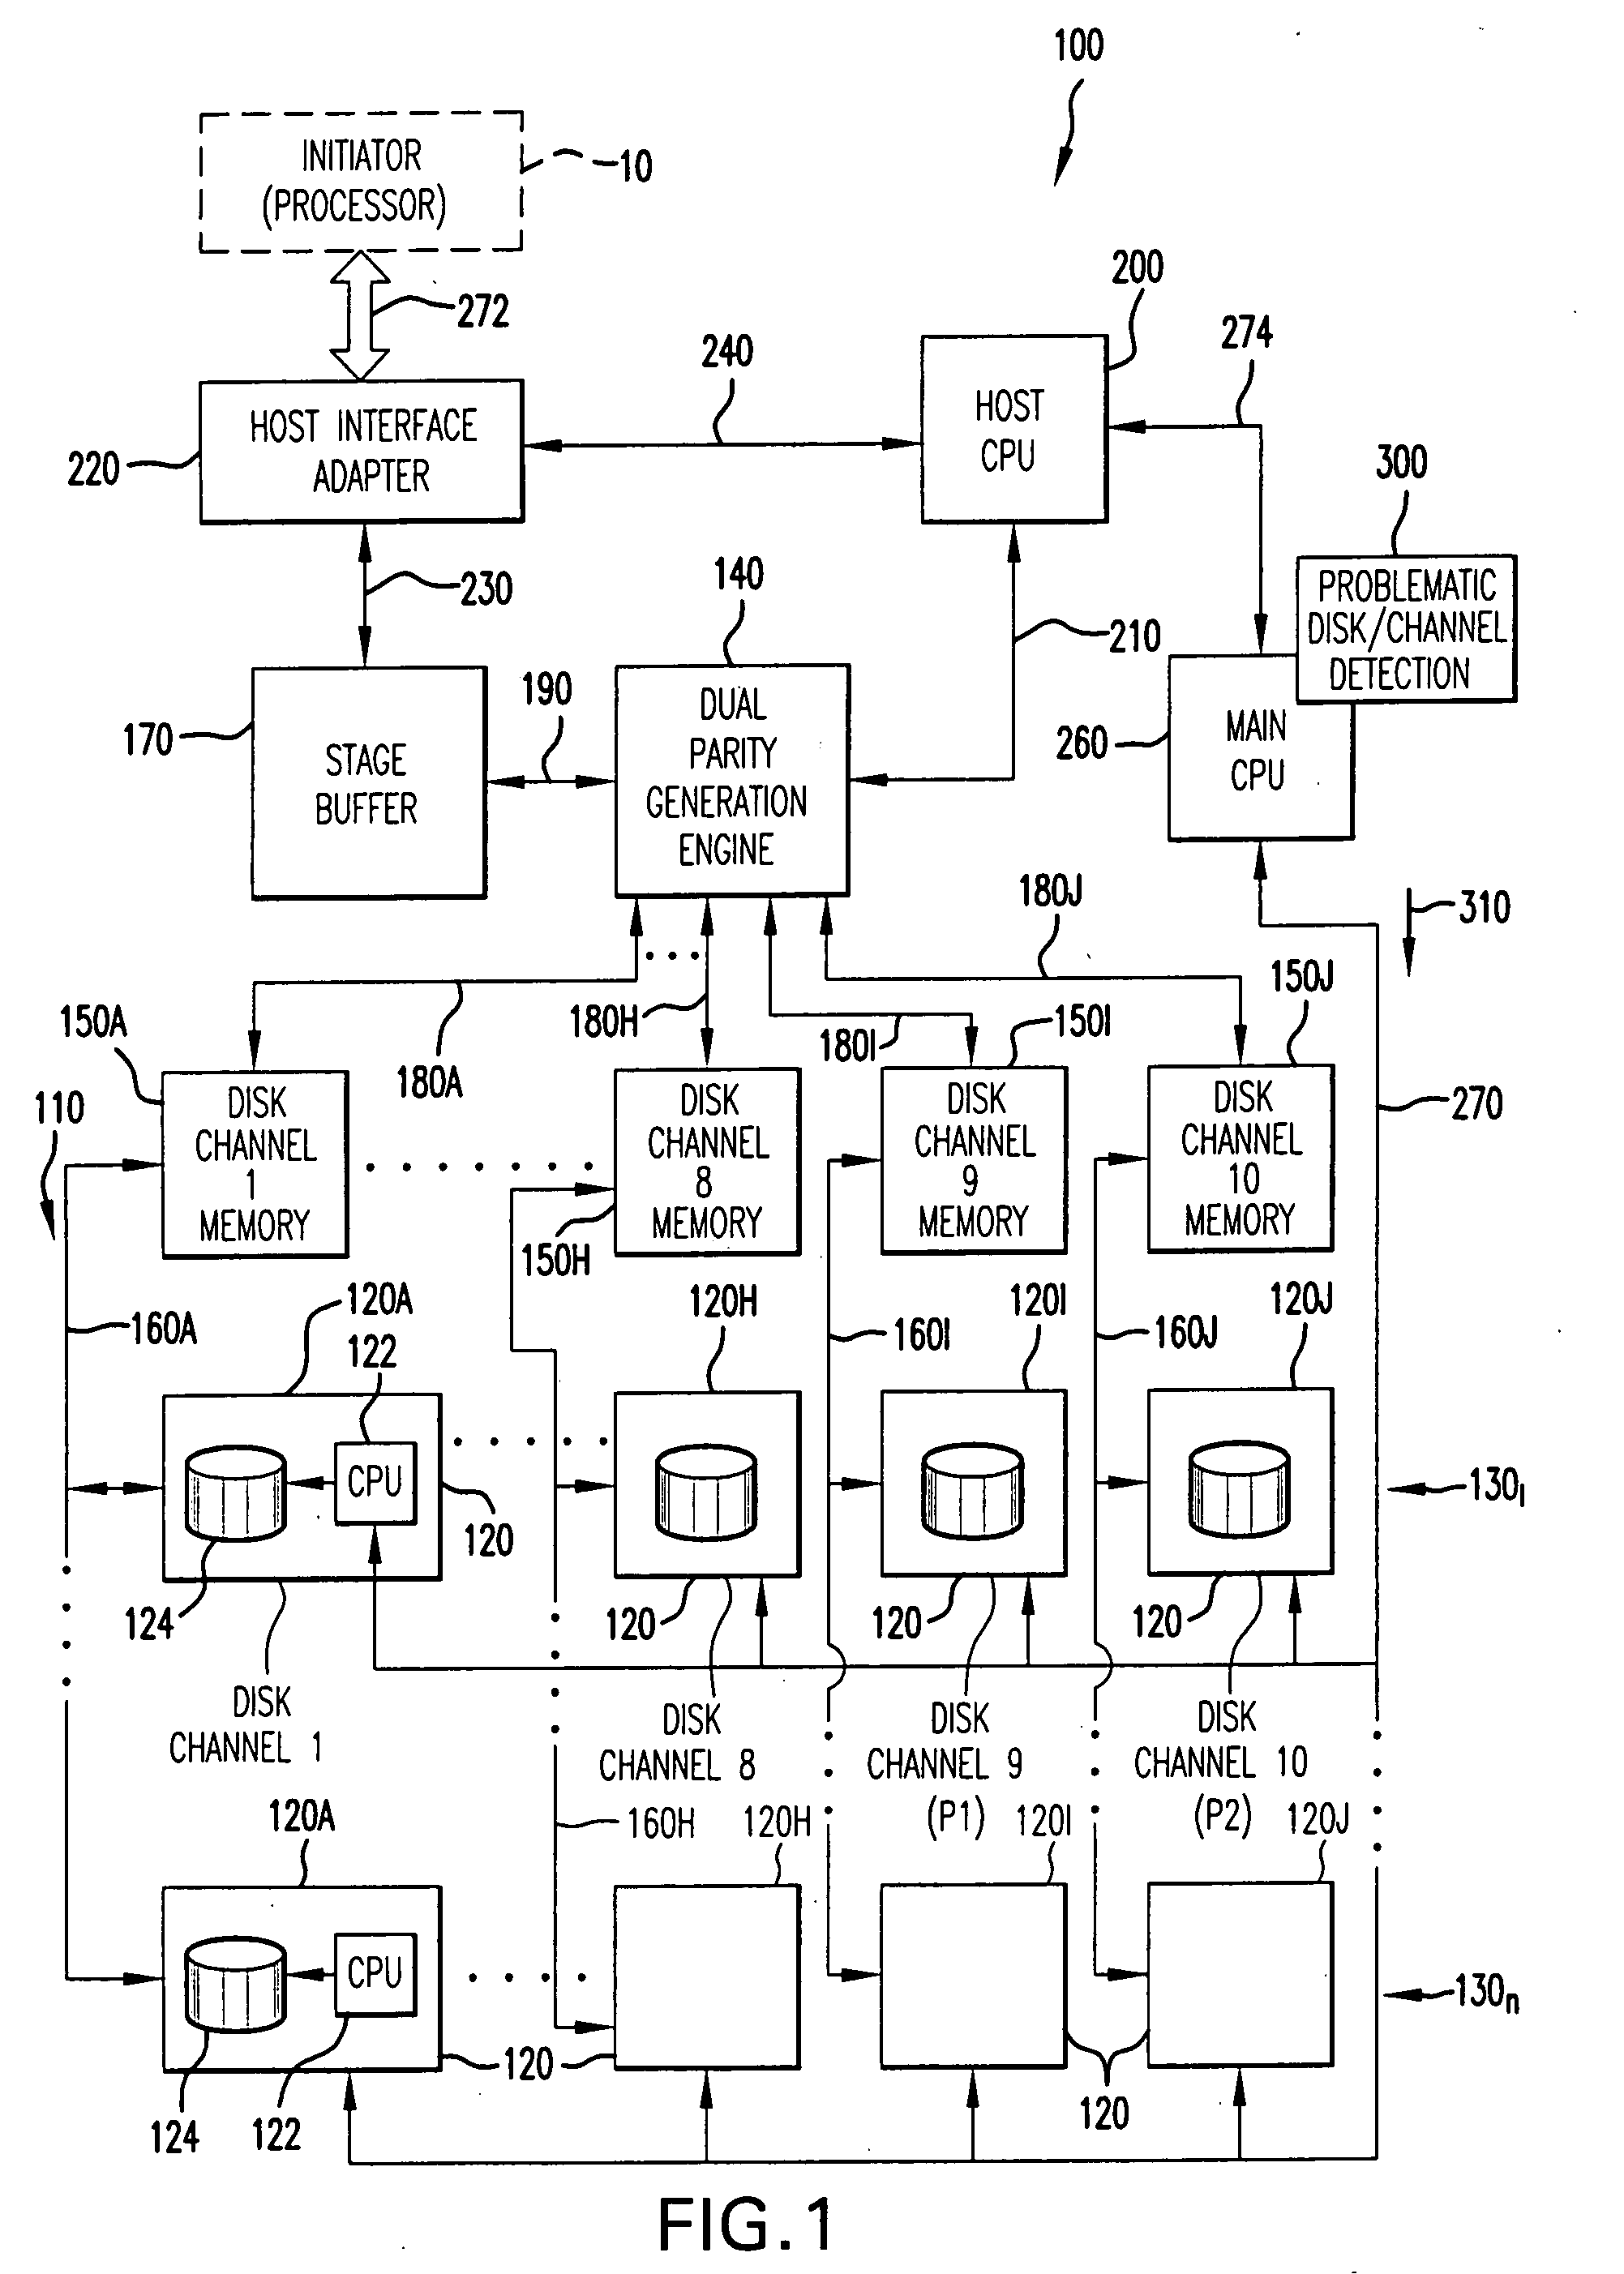 Method for detecting problematic disk drives and disk channels in a RAID memory system based on command processing latency